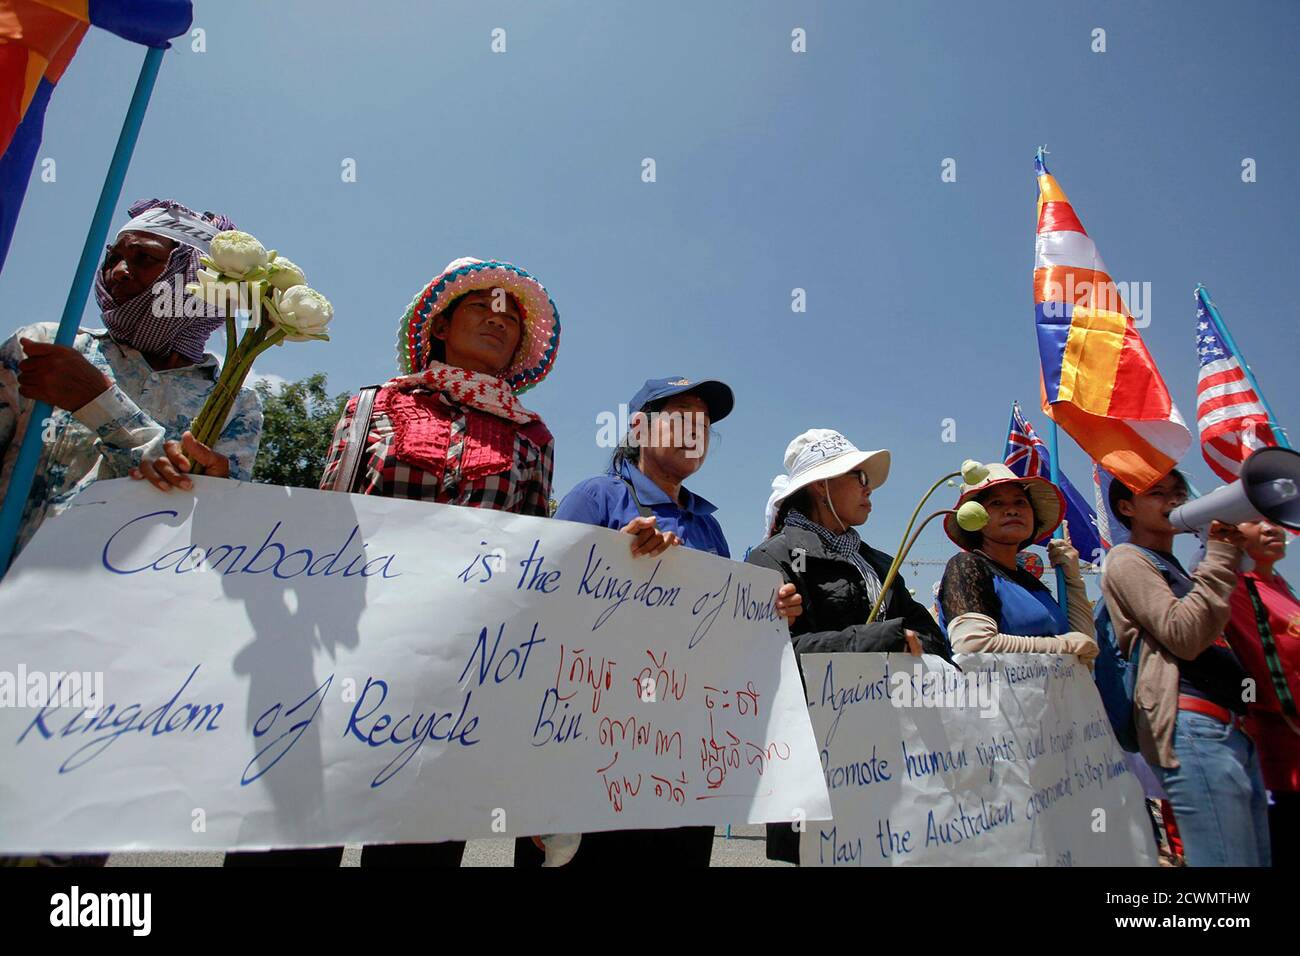 Protesters hold flags and banners as they gather outside the Australian Embassy Phnom Penh October 17, 2014. Protesters rallied in front of Australian Embassy in Phnom Penh against a recent signing